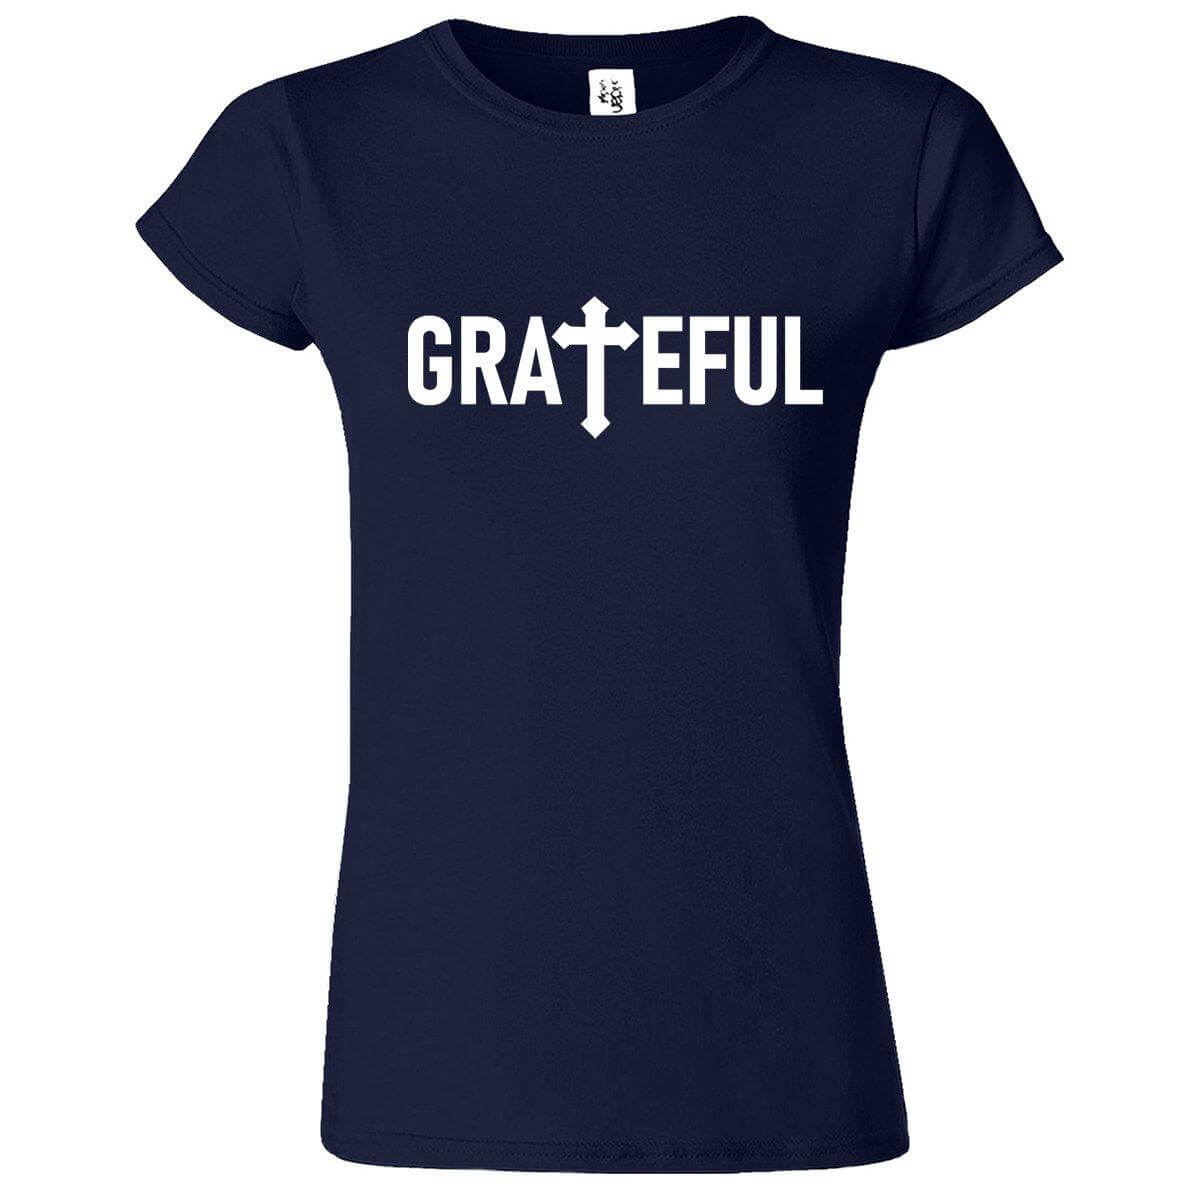 Gratefull Religious Printed T-Shirt for Women's - ApparelinClick